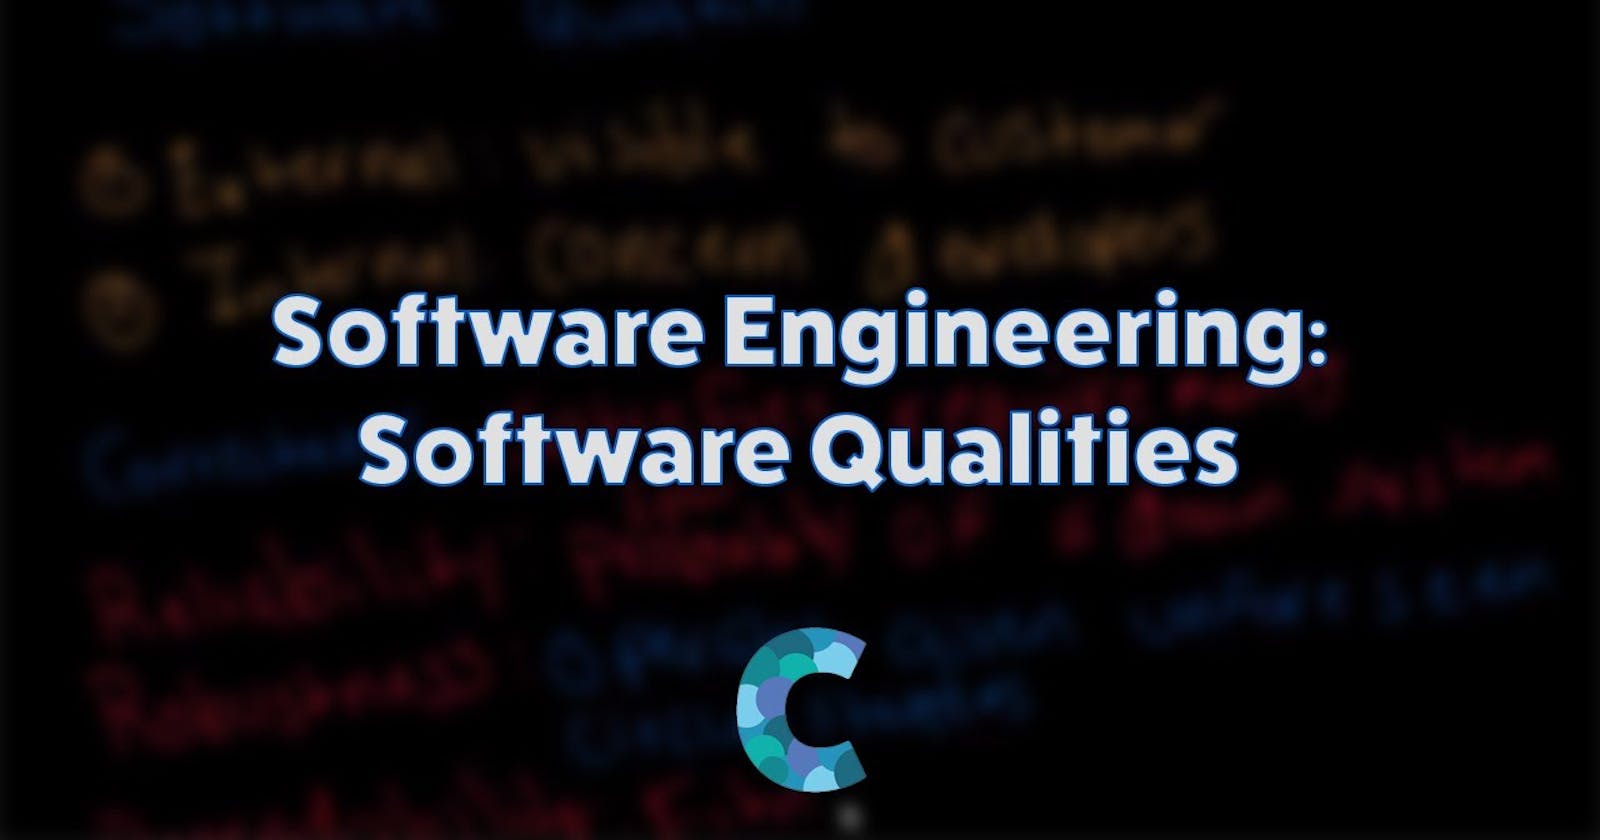 A software engineer must know the core concept